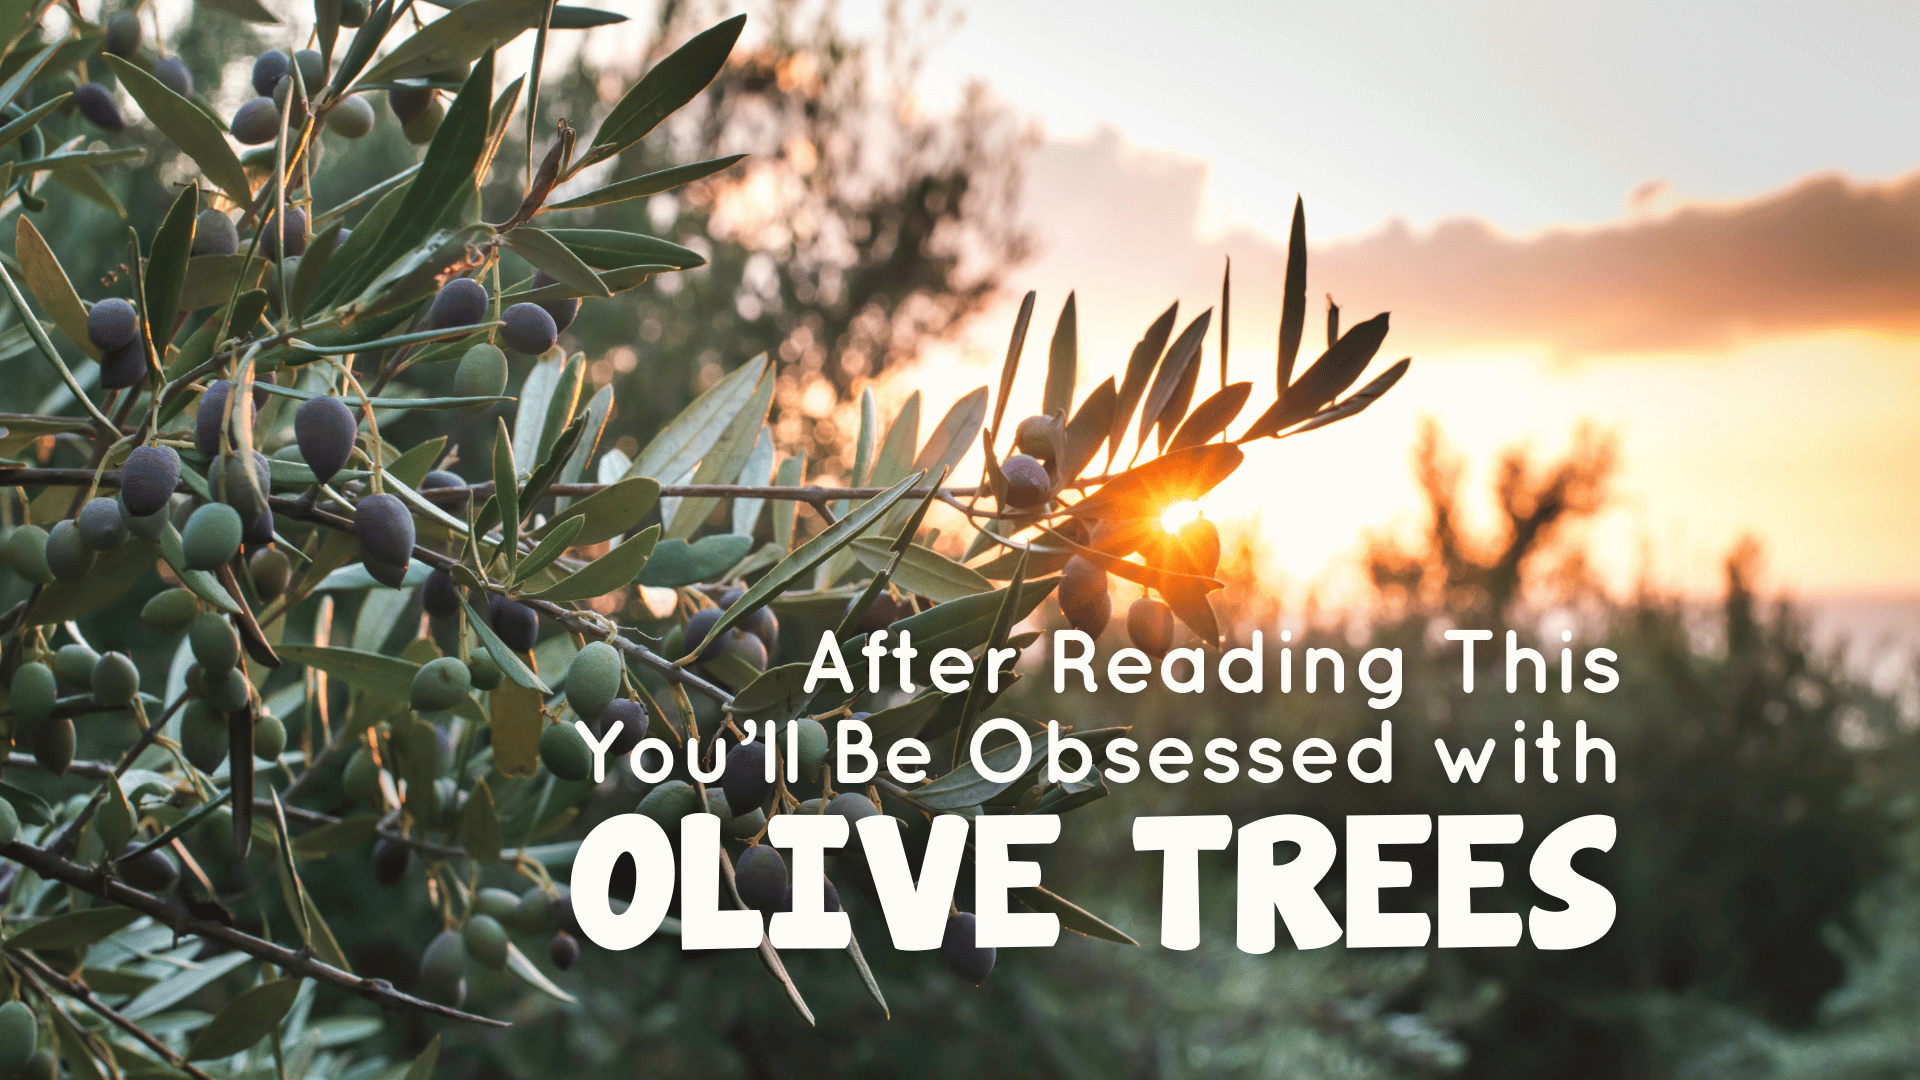 After Reading This You’ll Be Obsessed with Olive Trees